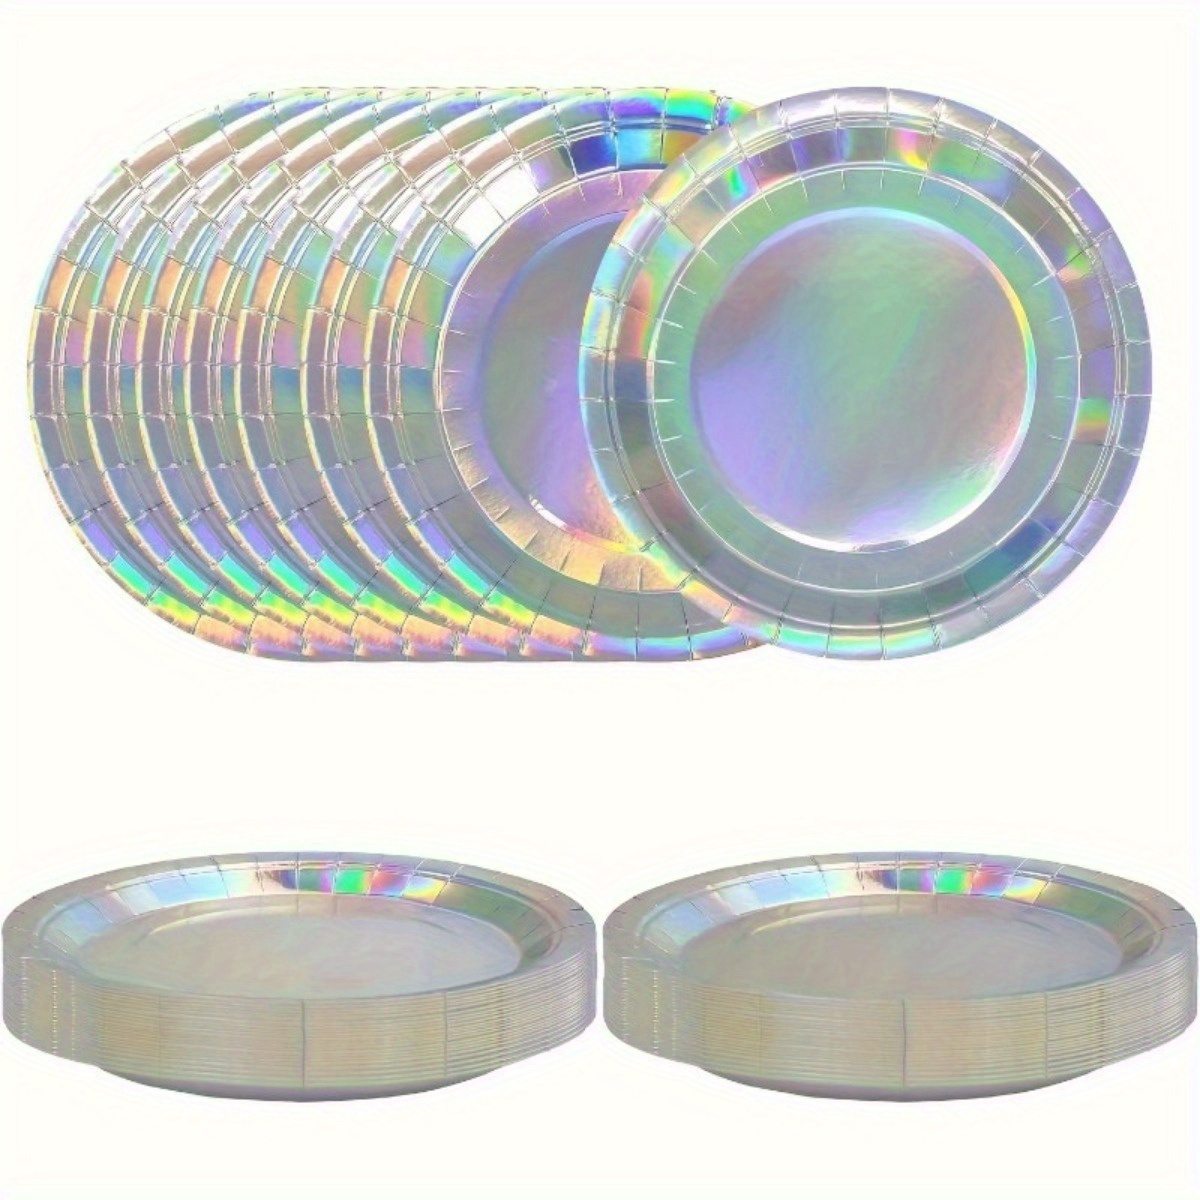 

20pcs Disposable Paper Plates - Holographic Iridescent Foil Design - Perfect For Birthday, Wedding, Anniversary, Christmas, Picnic, Bbq Party Supplies - Round Dinner Dessert Salad Pizza Plates